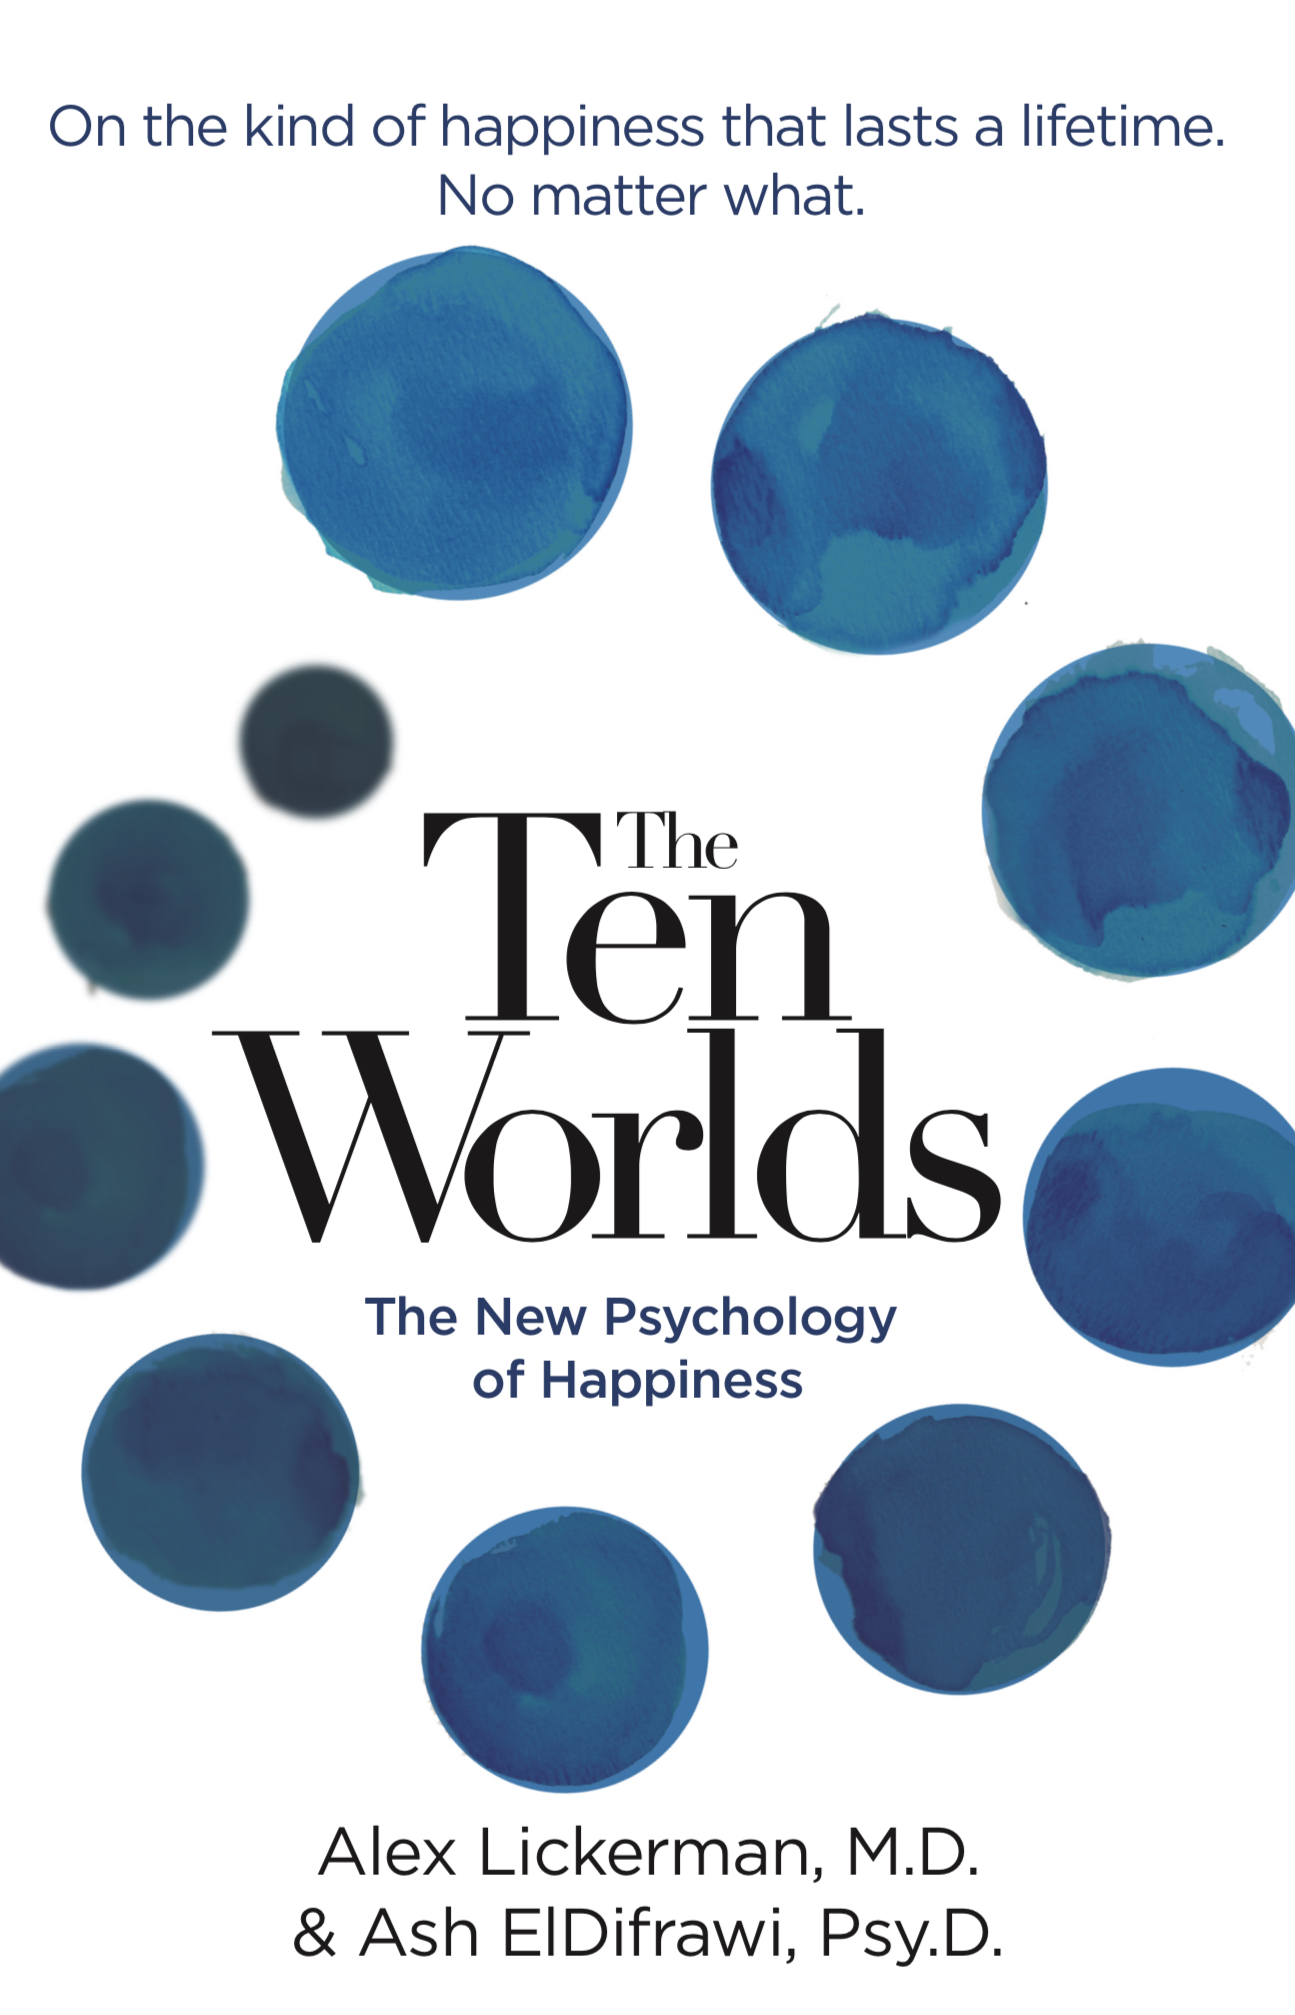 The Ten Worlds: The New Psychology of Happiness